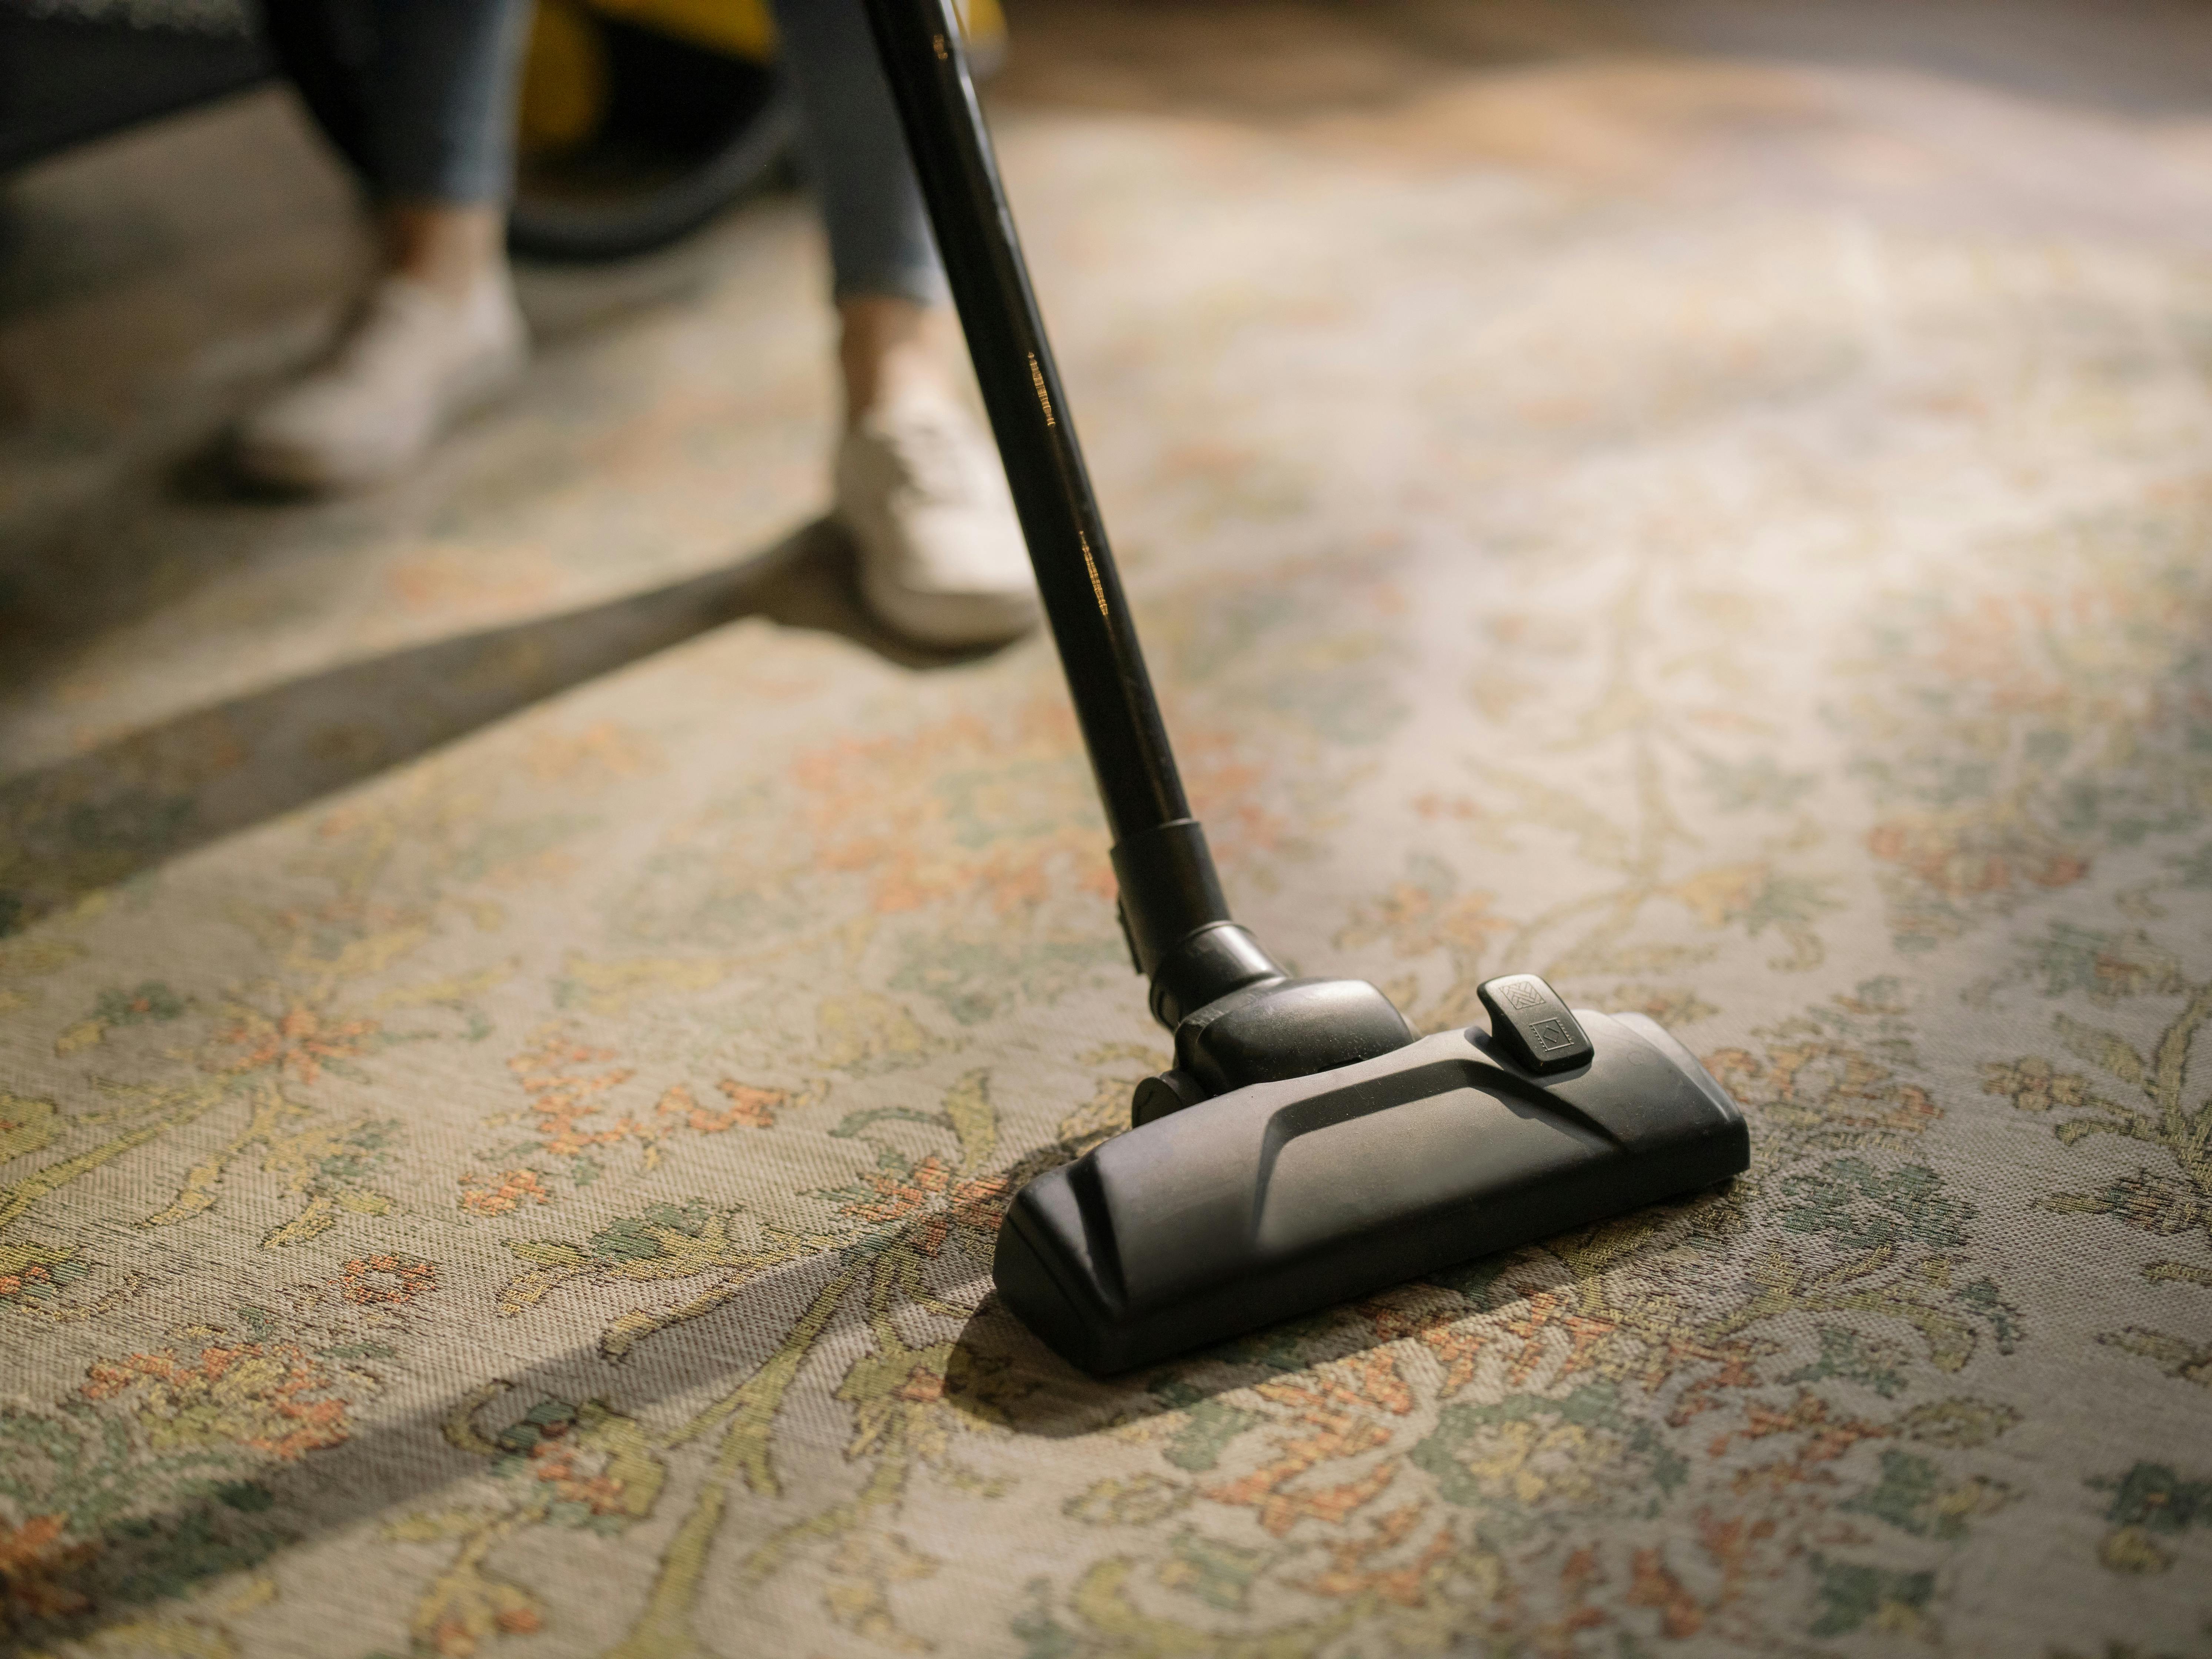 Black Vacuum Cleaner on Brown and White Area Rug \u00b7 Free Stock Photo